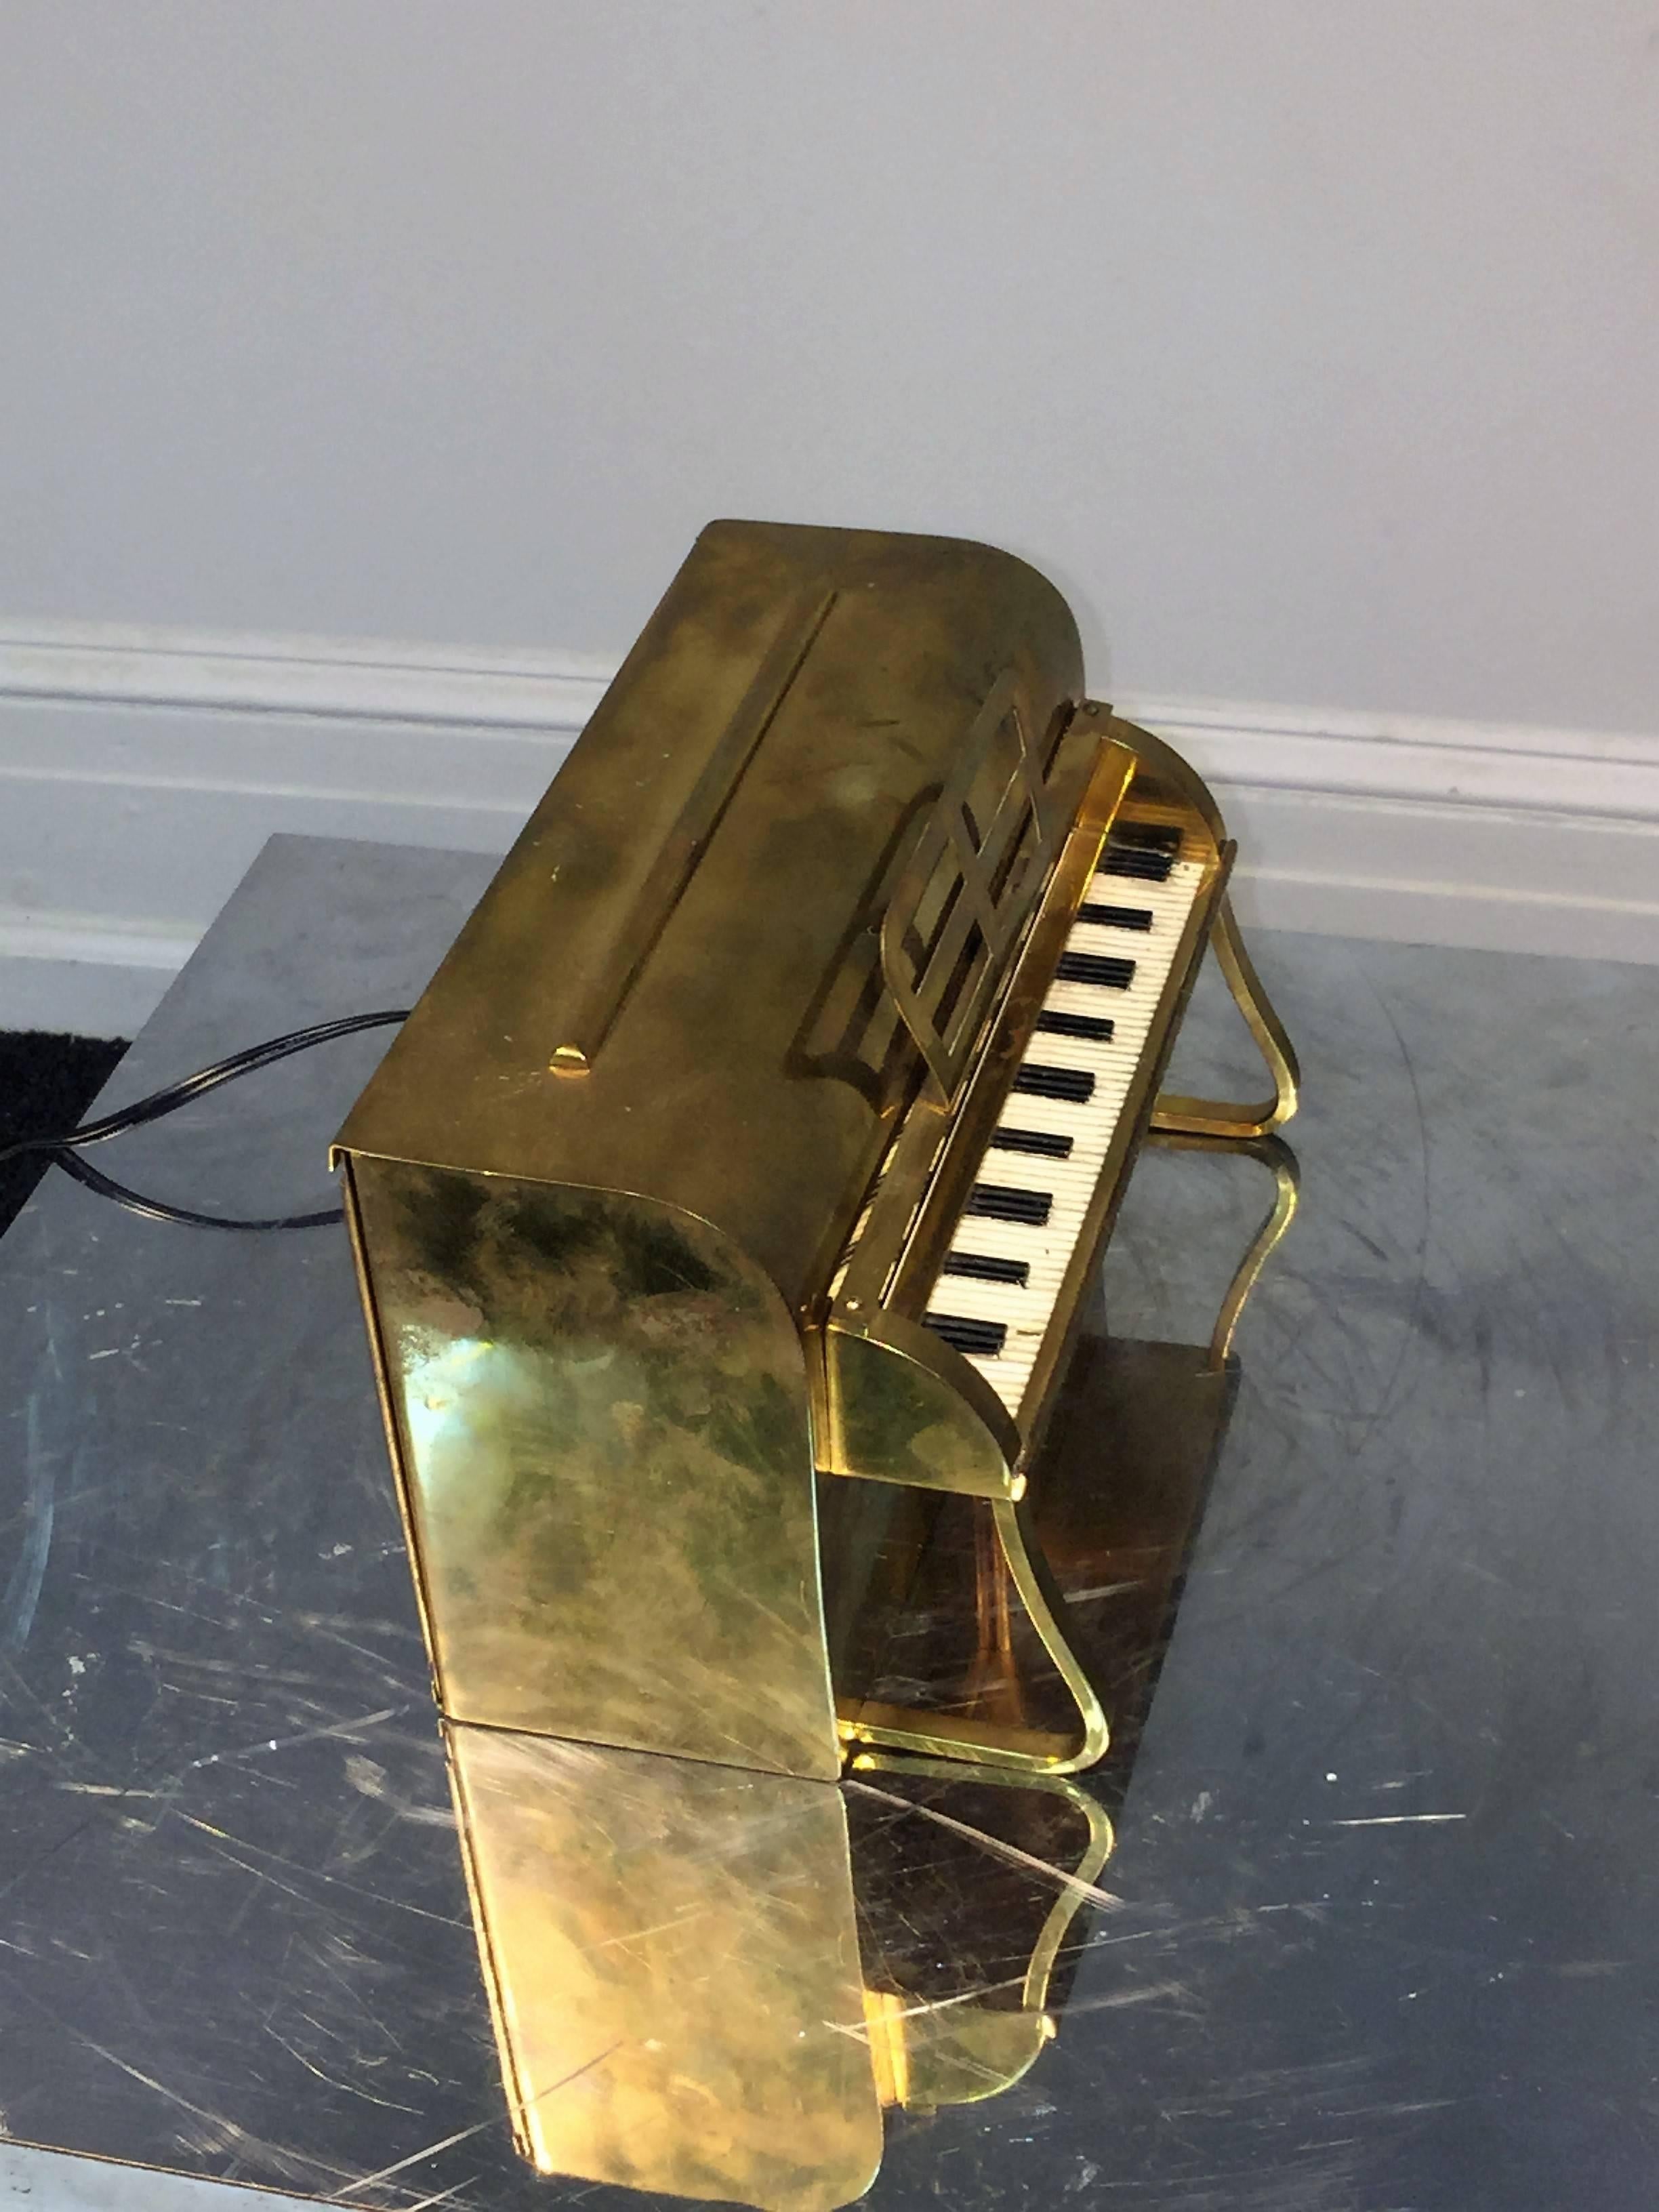 Polished brass electric digital piano clock -1940's-measurements are 9 3/4